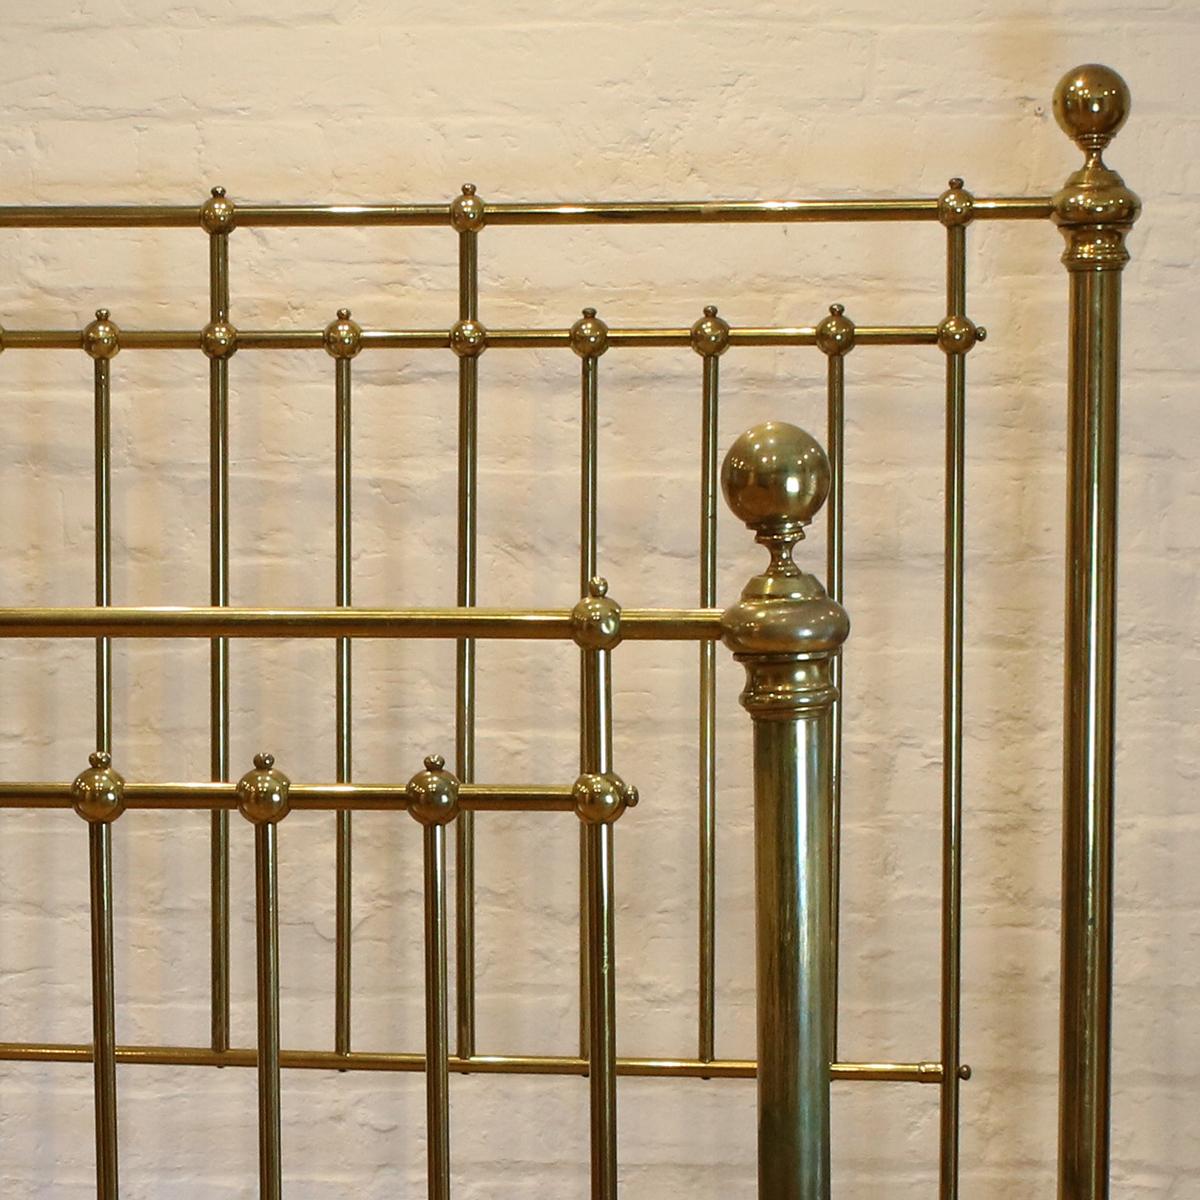 Antique brass bedstead with ball shaped castings, large 2 inch wide posts and central decorative feature on the foot panel. The original patina of the lacquer gives this bed an attractive overall golden hue. 

This bed accepts a British king size or